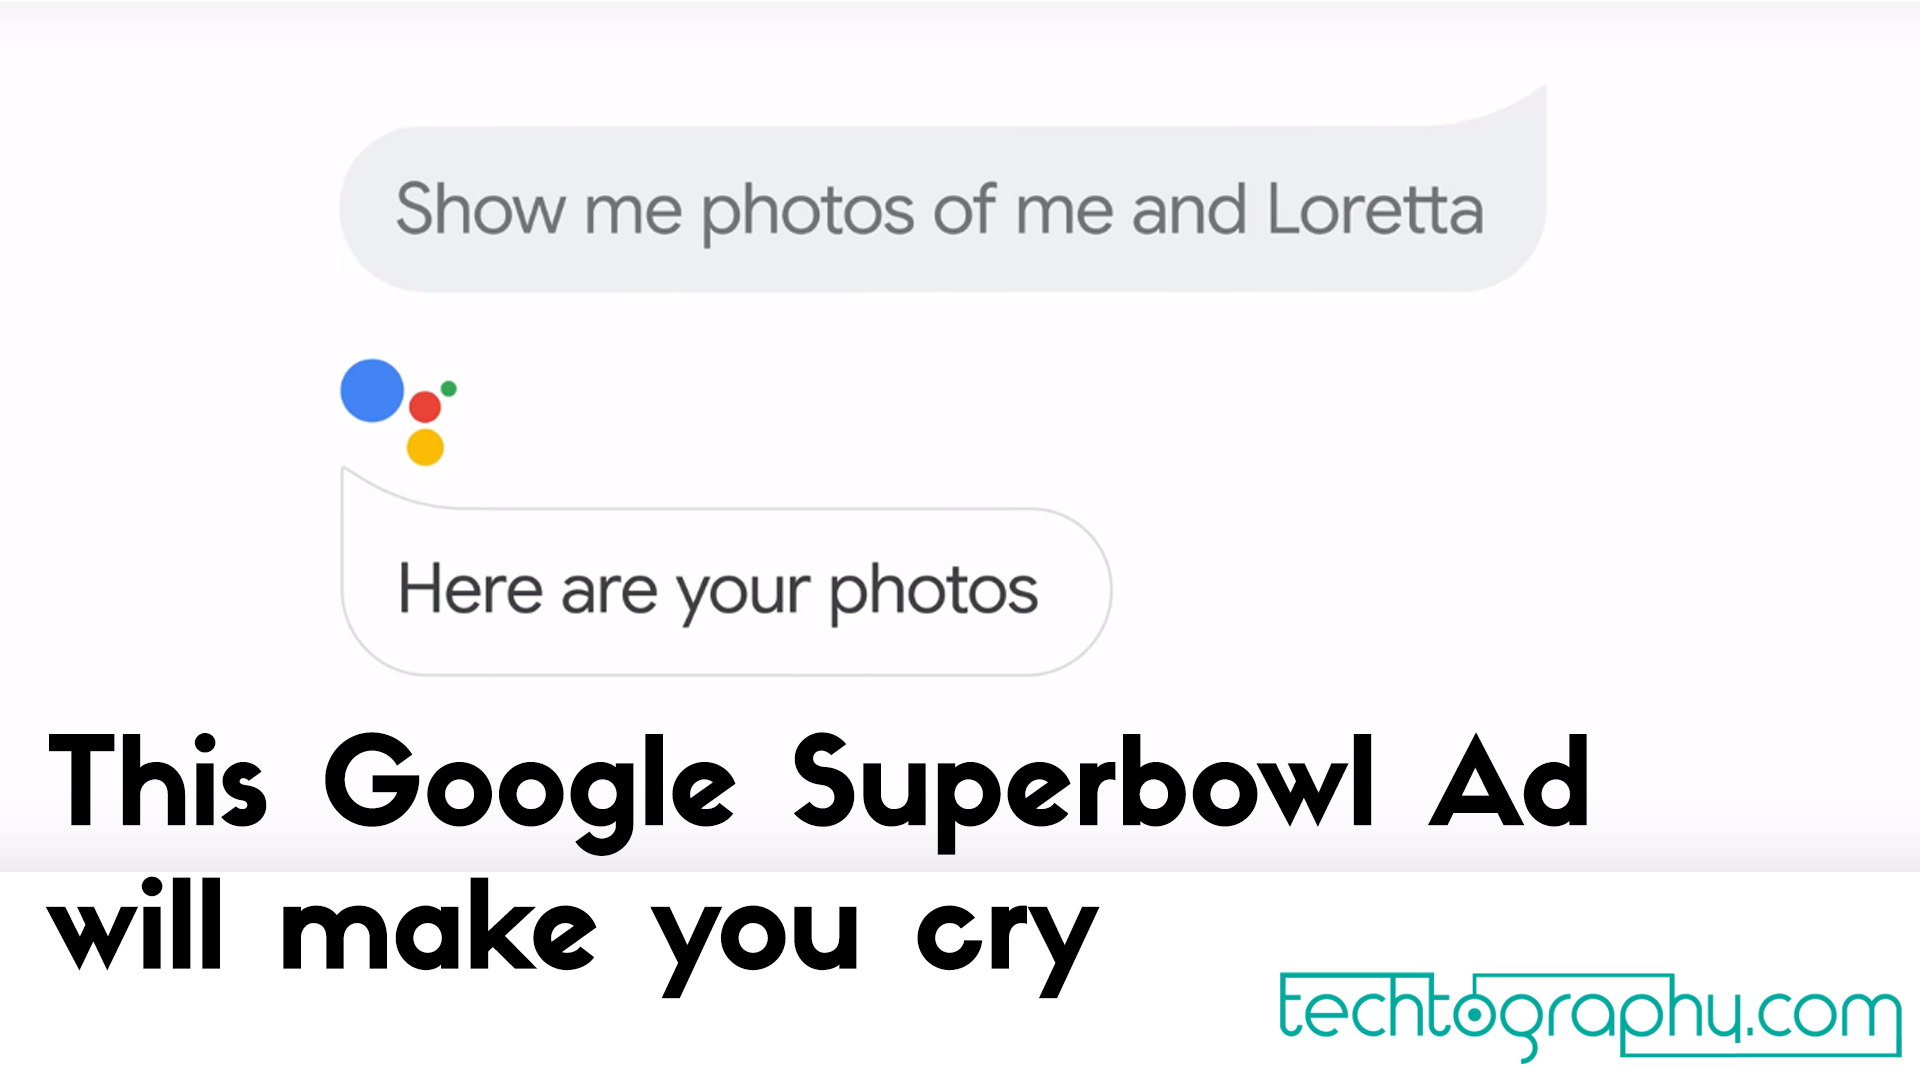 This Google Superbowl Ad will make you cry…